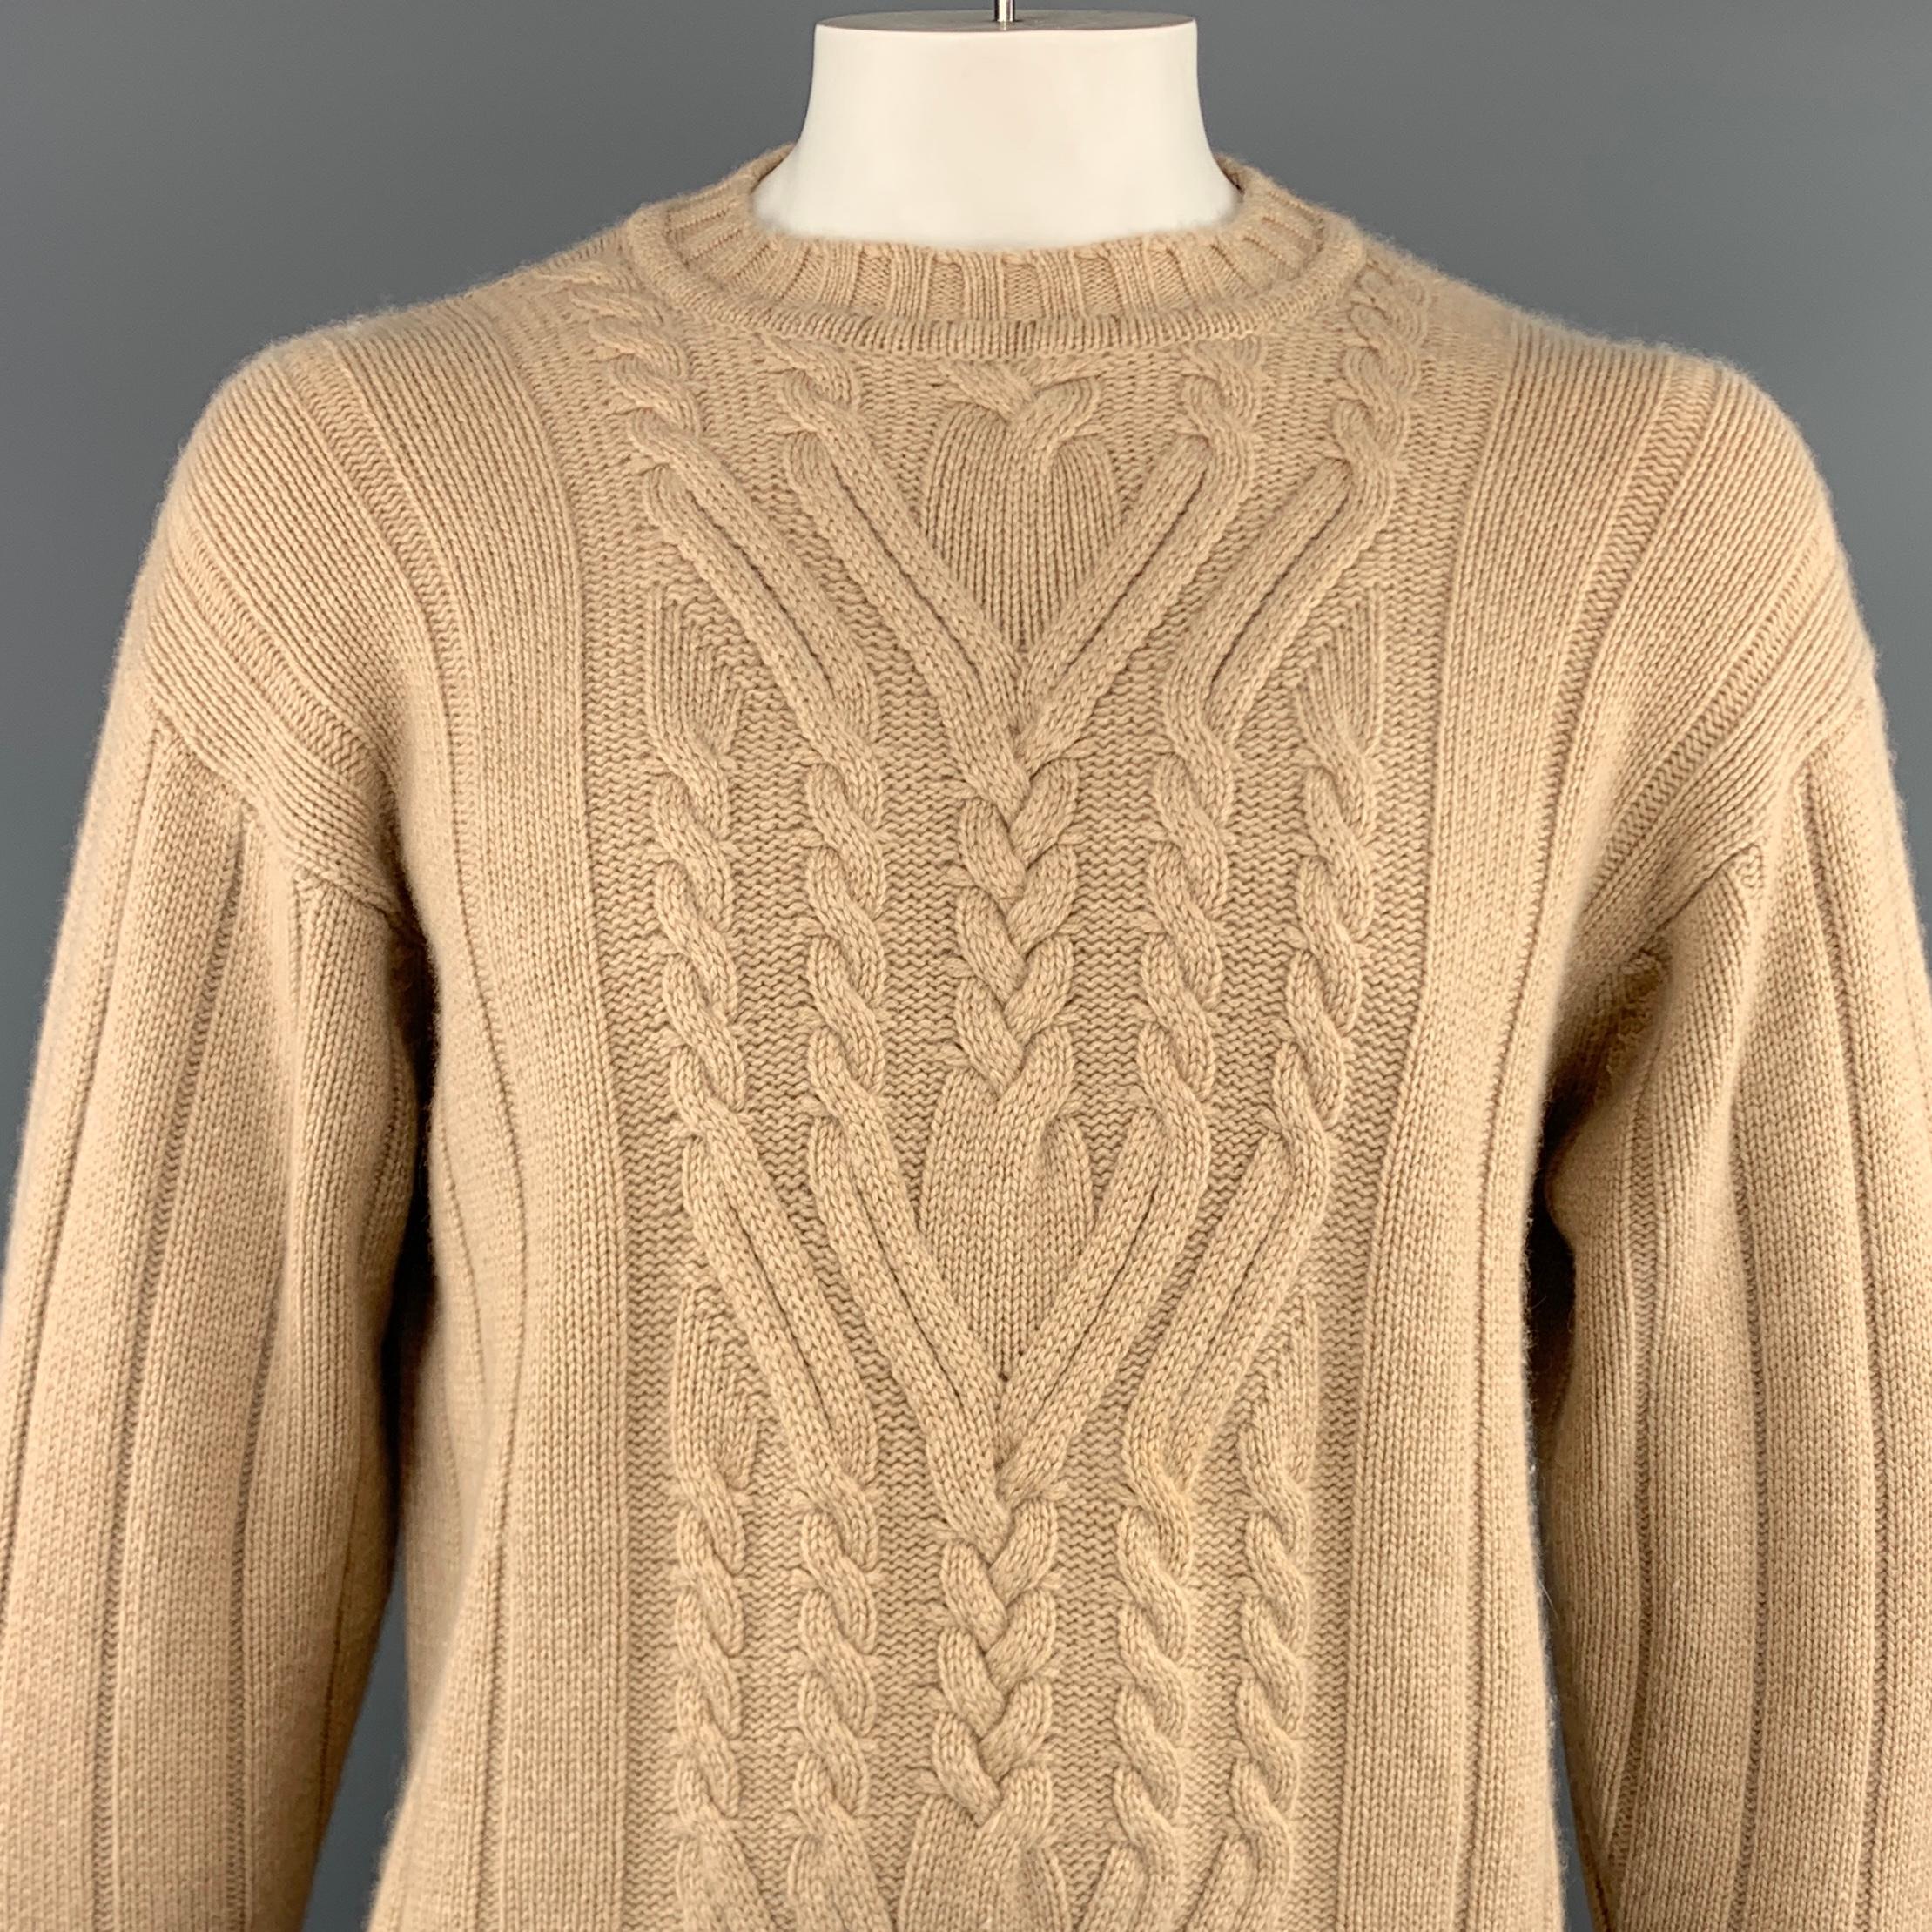 MANRICO sweater comes in a tan cable cashmere featuring a crew-neck style. Made in Italy.
 
Excellent Pre-Owned Condition.
Marked: 52
 
Measurements:
 
Shoulder: 24.5 in.
Chest: 51 in.
Sleeve: 26.5 in.
Length: 30.5 in.